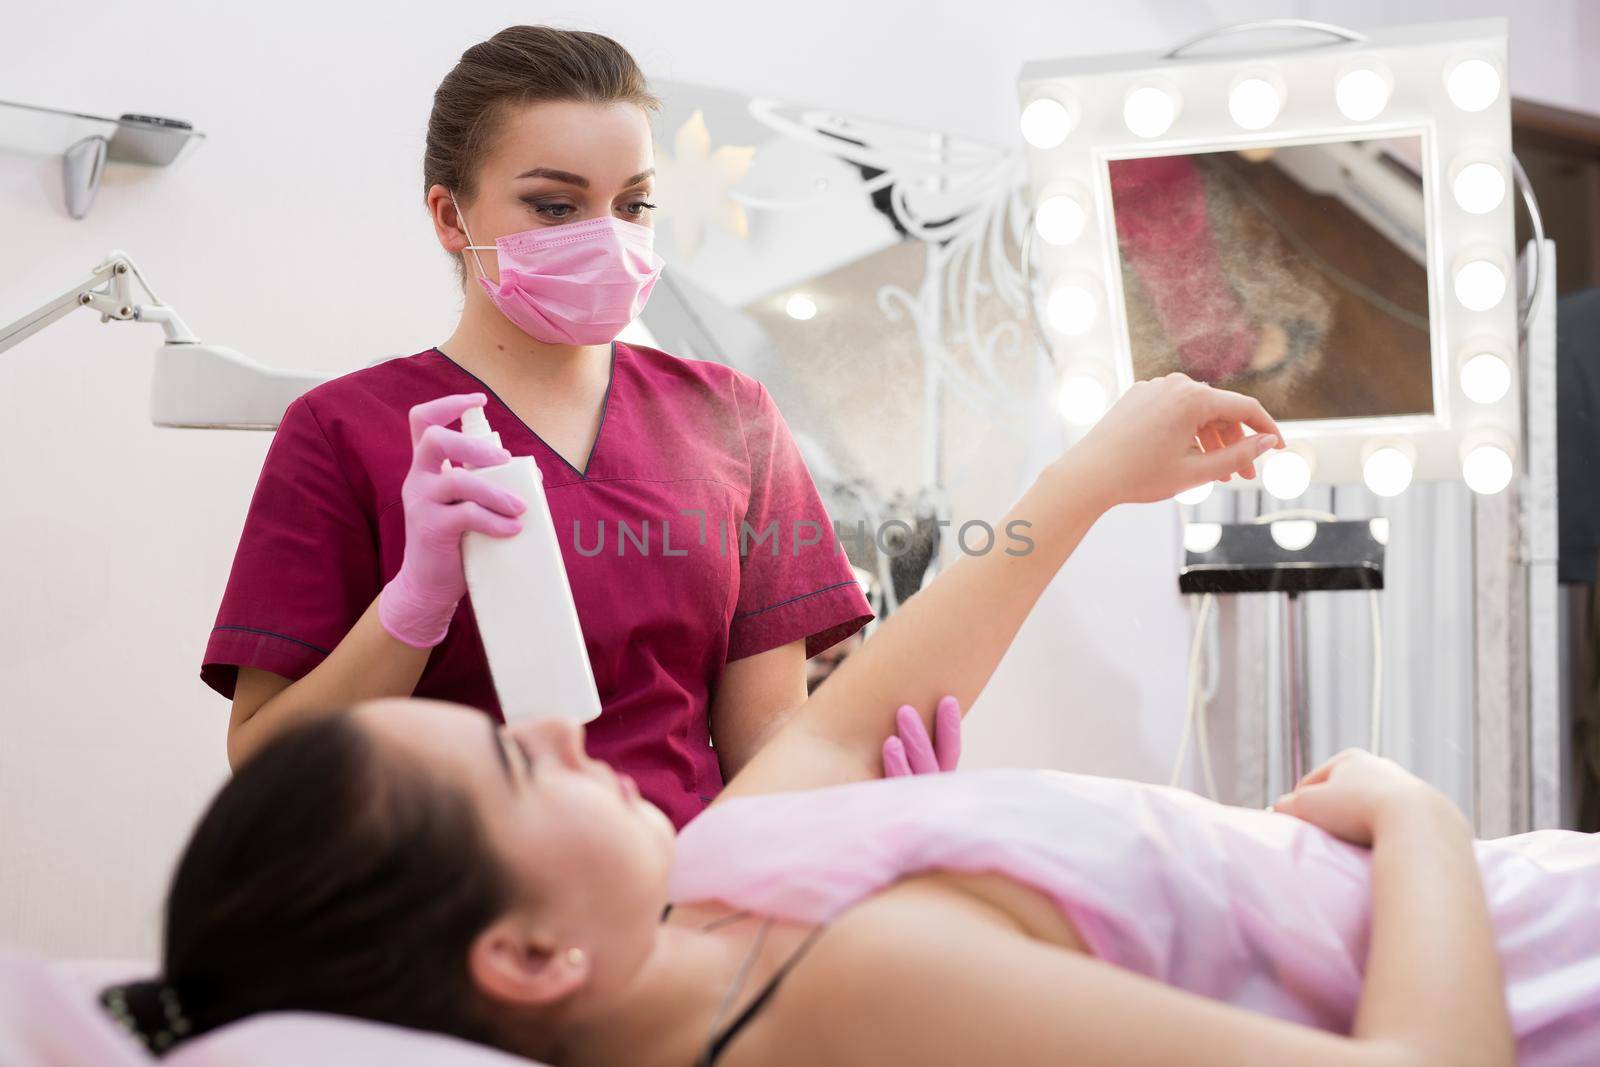 Female cosmetologist treats the hand of a young girl before the hair removal procedure. Shugaring. Master shugaring sprinkles disinfectant solution on the hand before depilation